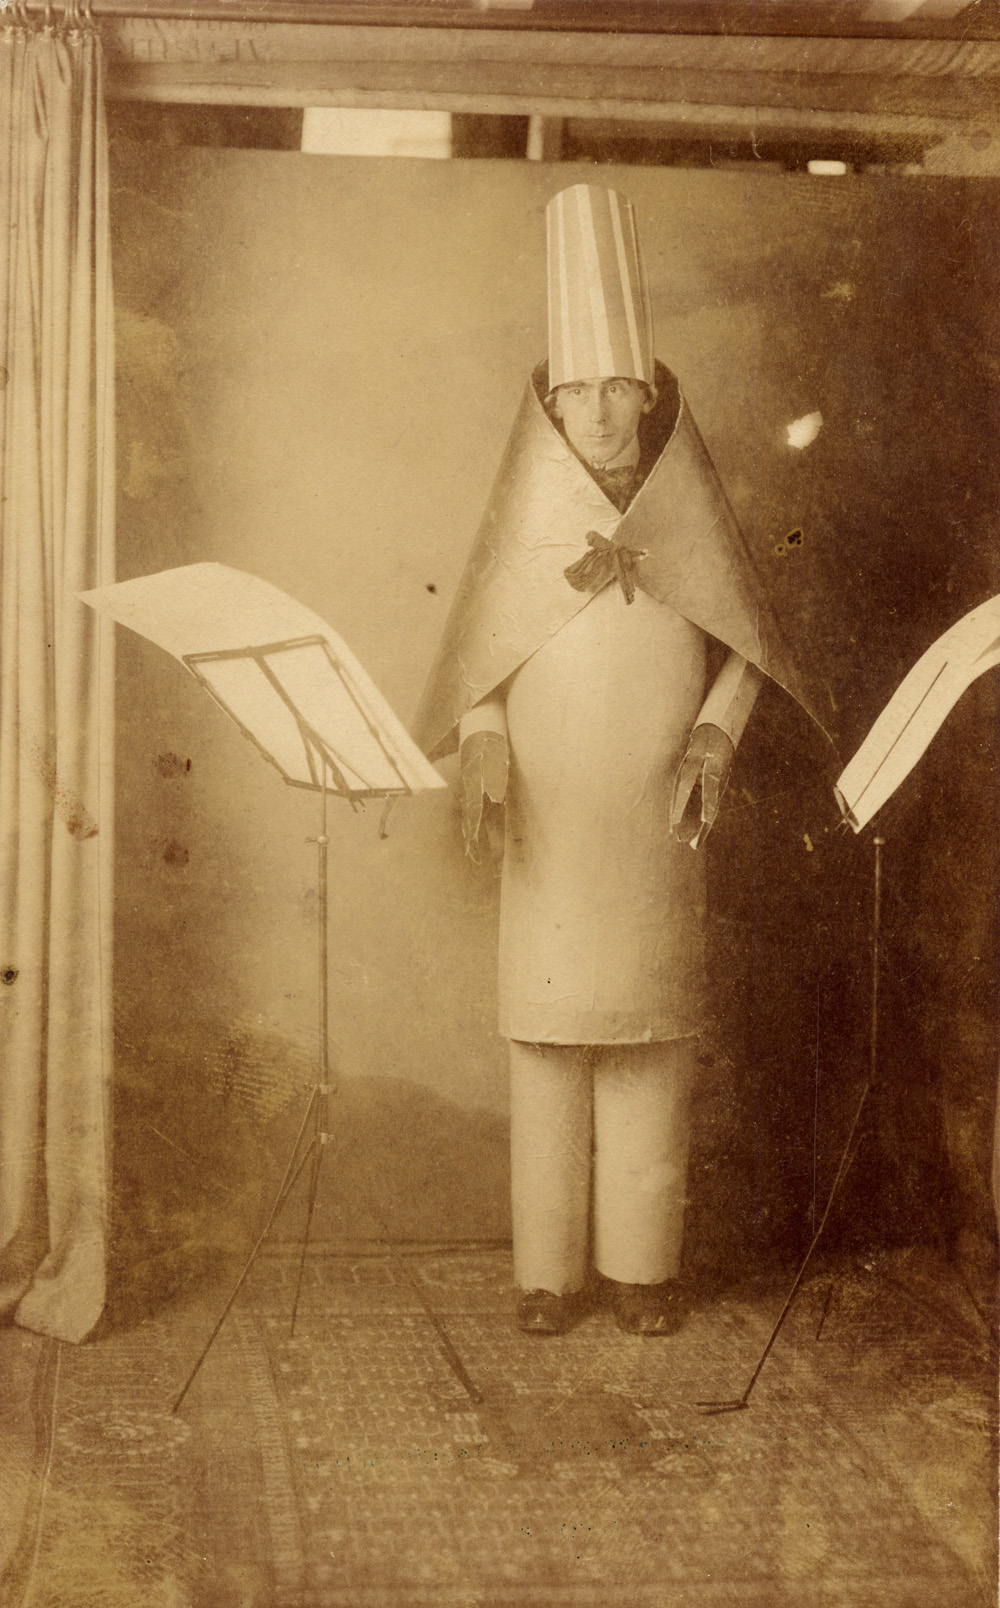 A picture of a Dada performance.